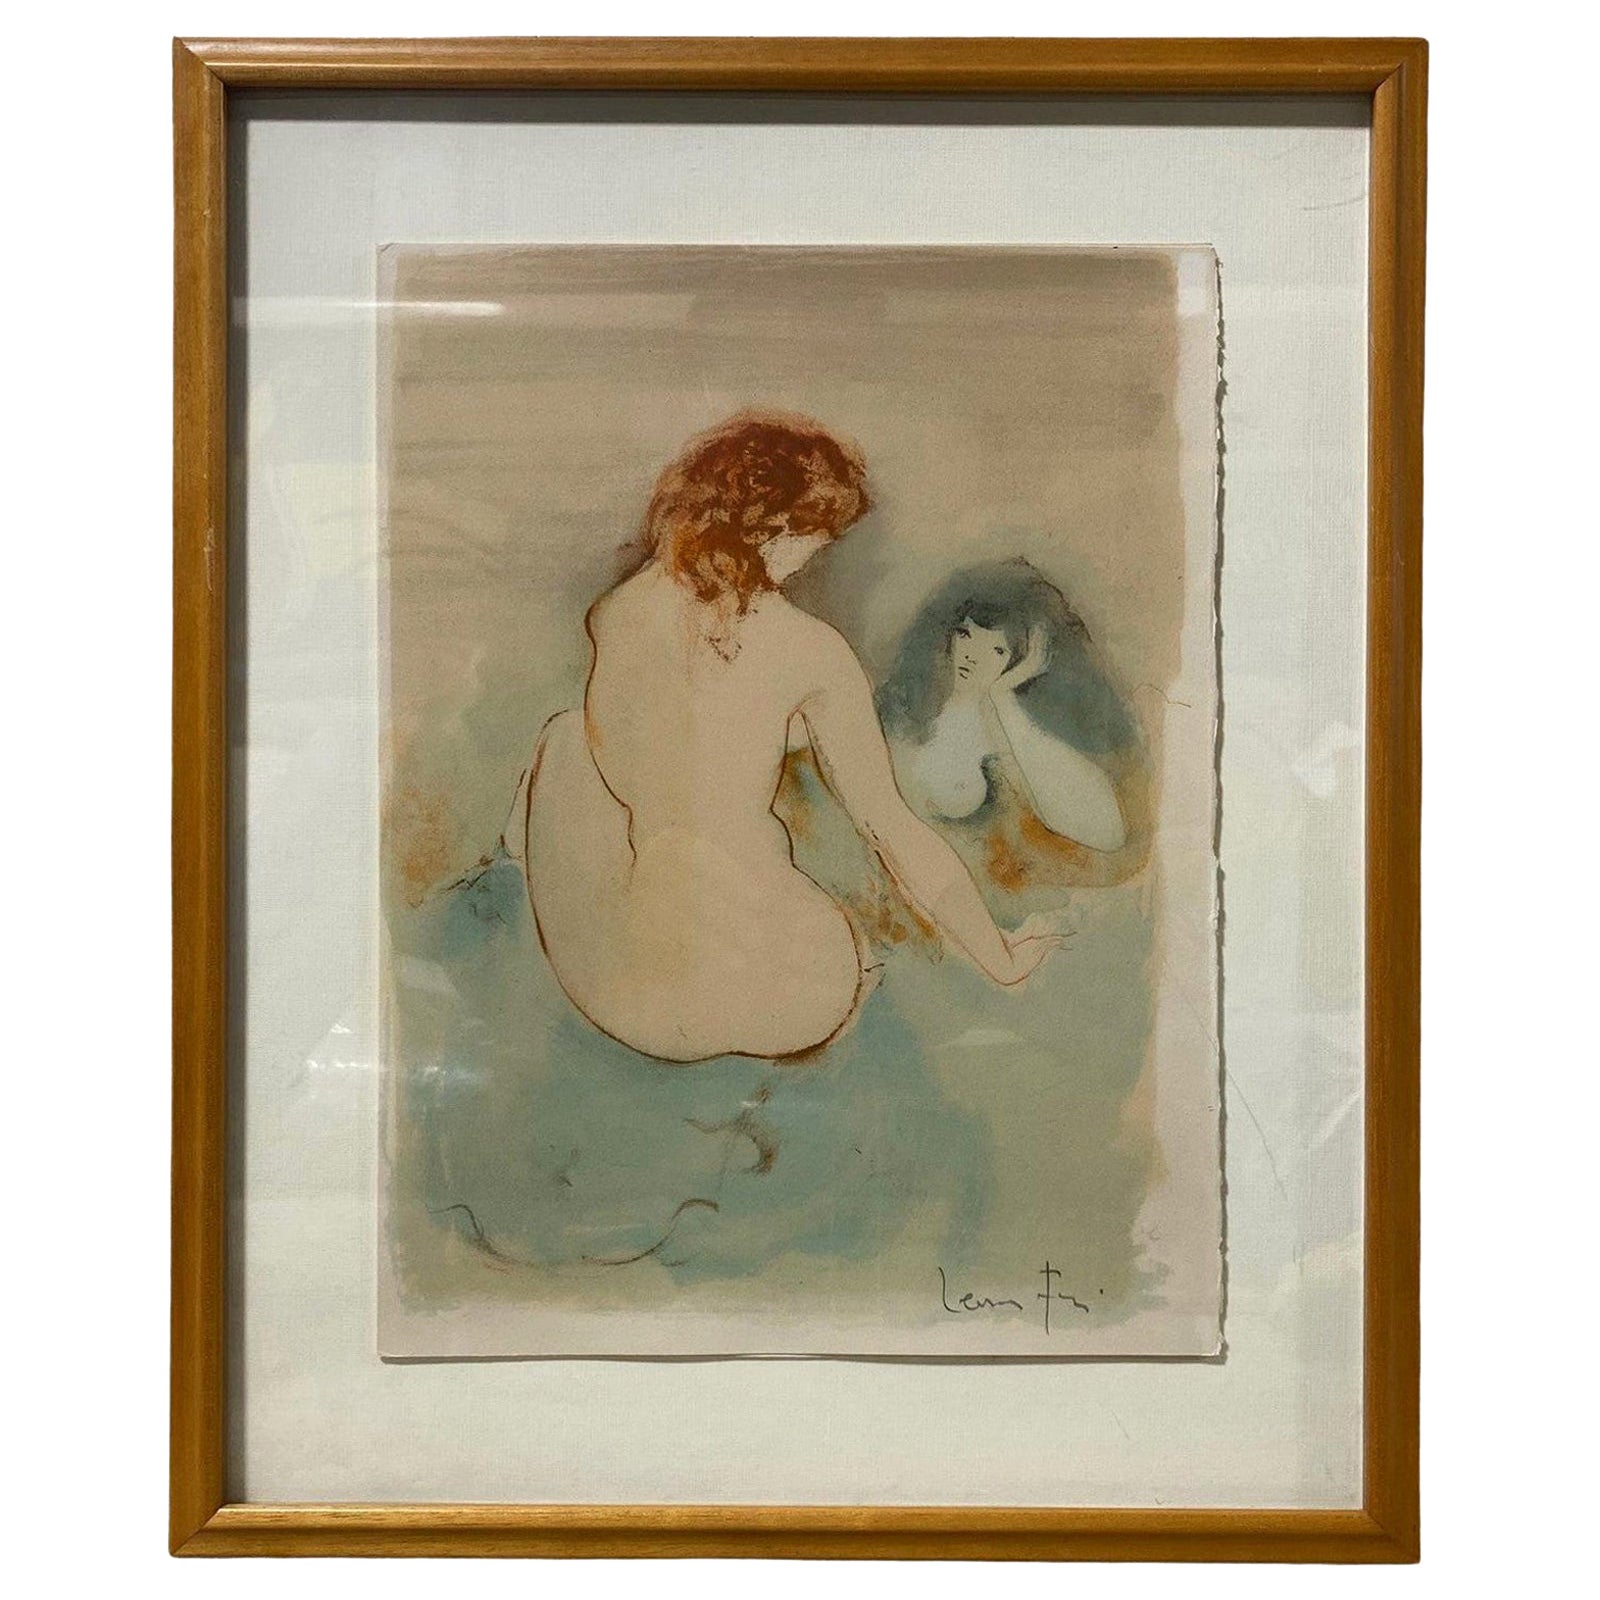 Leonor Fini Signed Framed Beautiful Lithograph Print Deux Femmes, circa 1970s For Sale